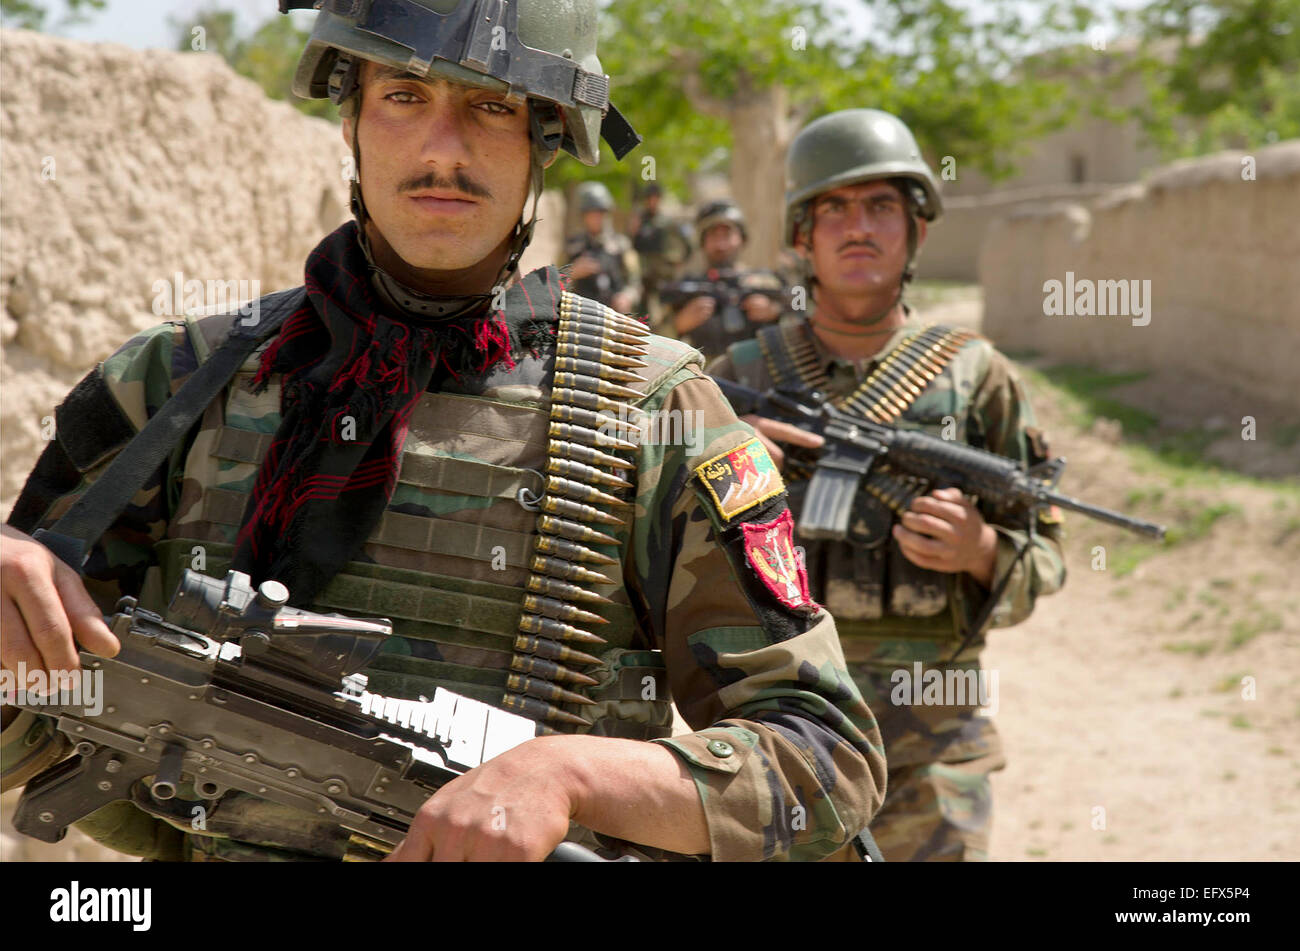 Afghan National Army commandos from the 3rd Commando Kandak during a patrol April 26, 2012 in Tambil village, Khahrez district, Kandahar province, Afghanistan. Stock Photo